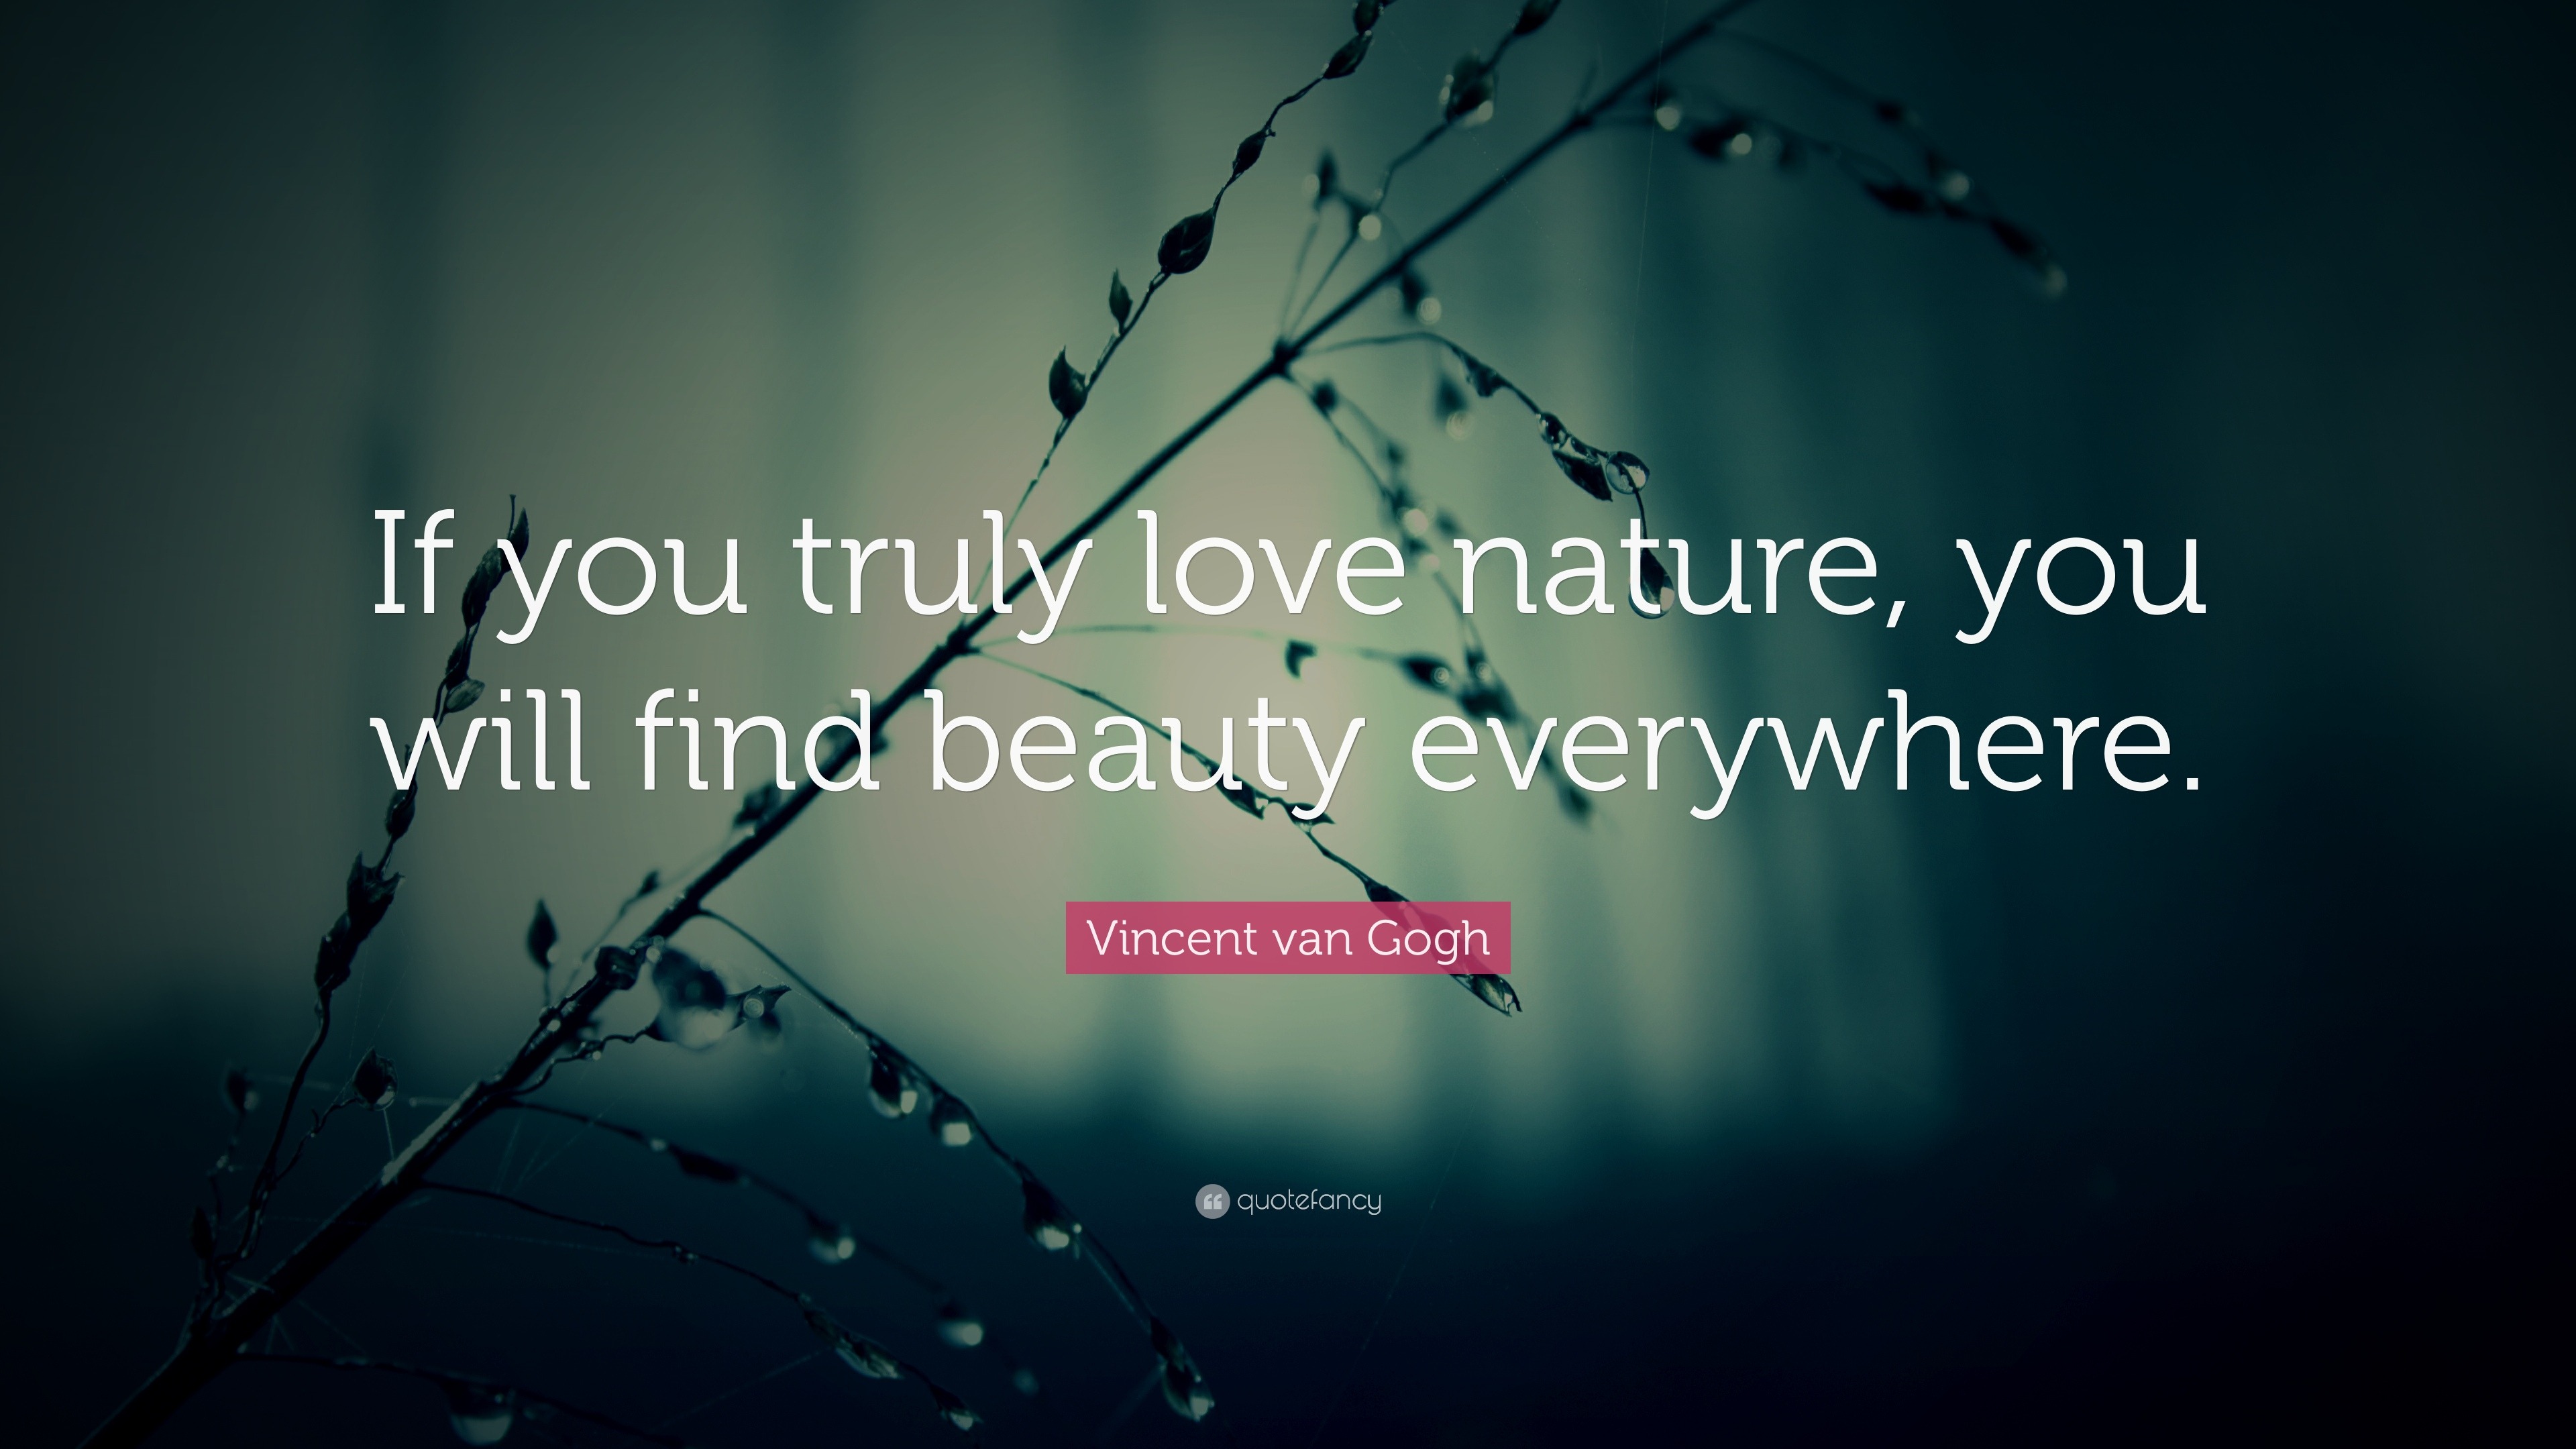 Vincent van Gogh Quote “If you truly love nature you will find beauty